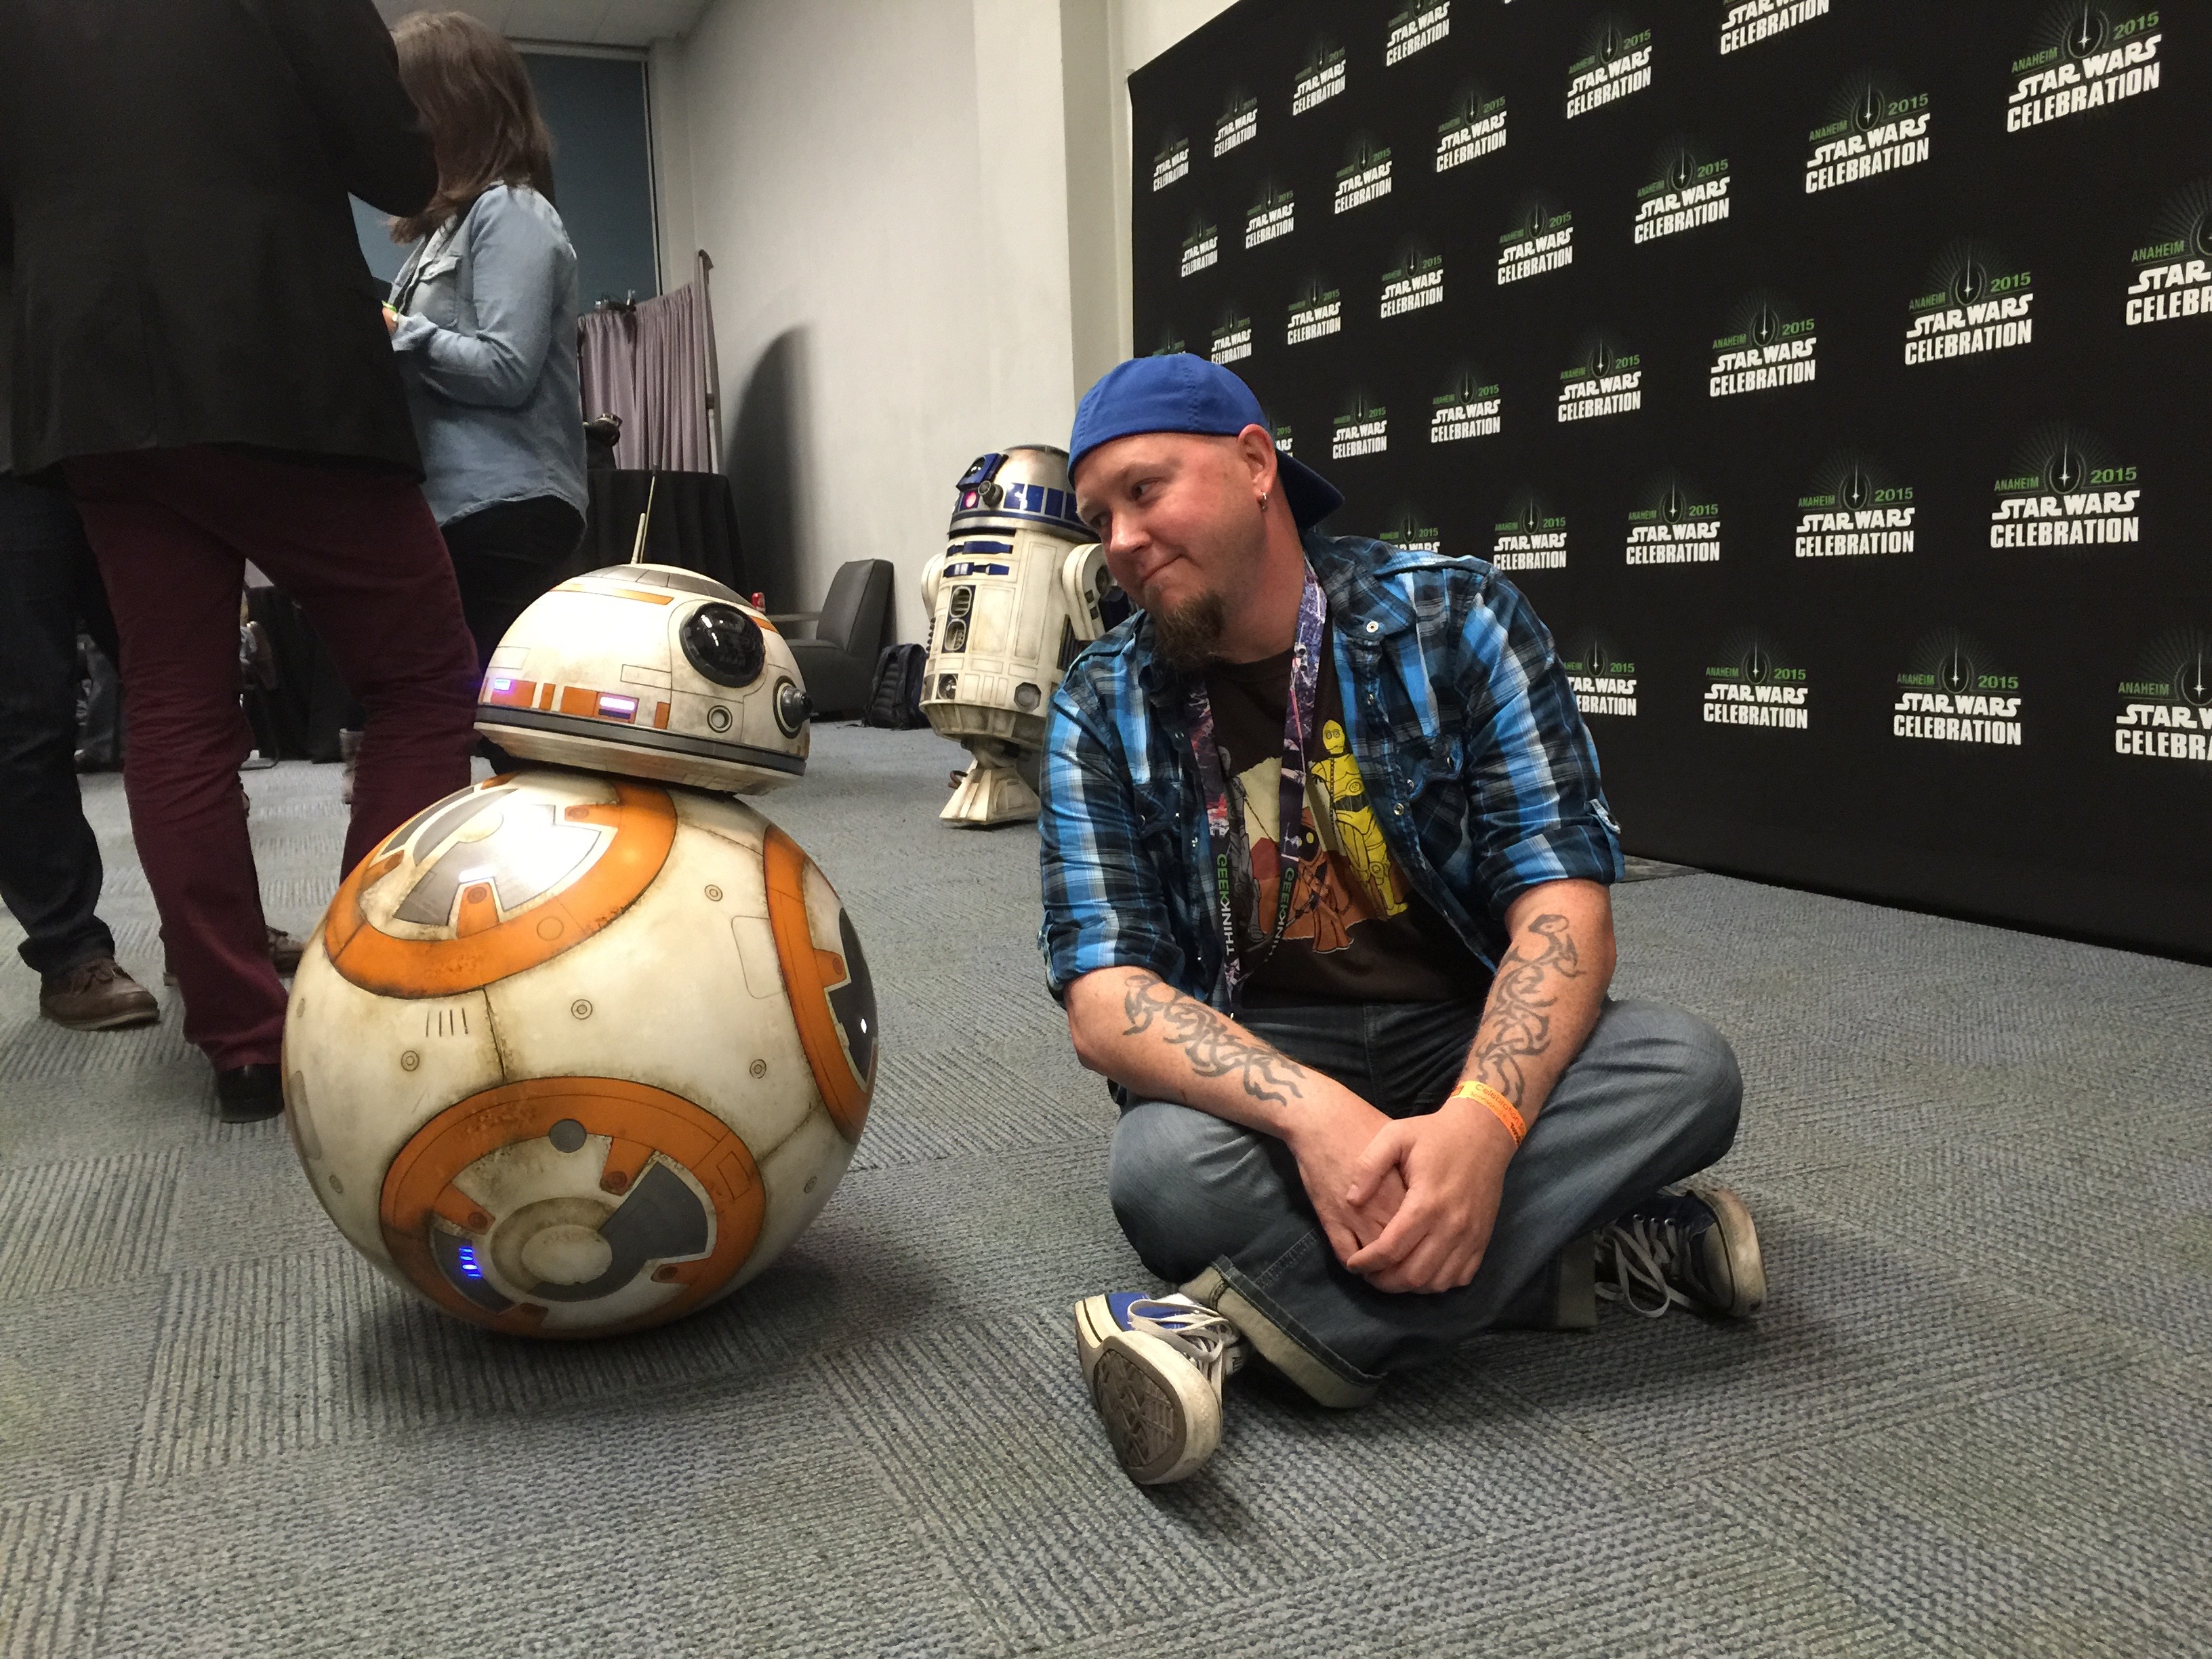 Matthew Rowbottom and BB-8 from Star Wars: The Force Awakens